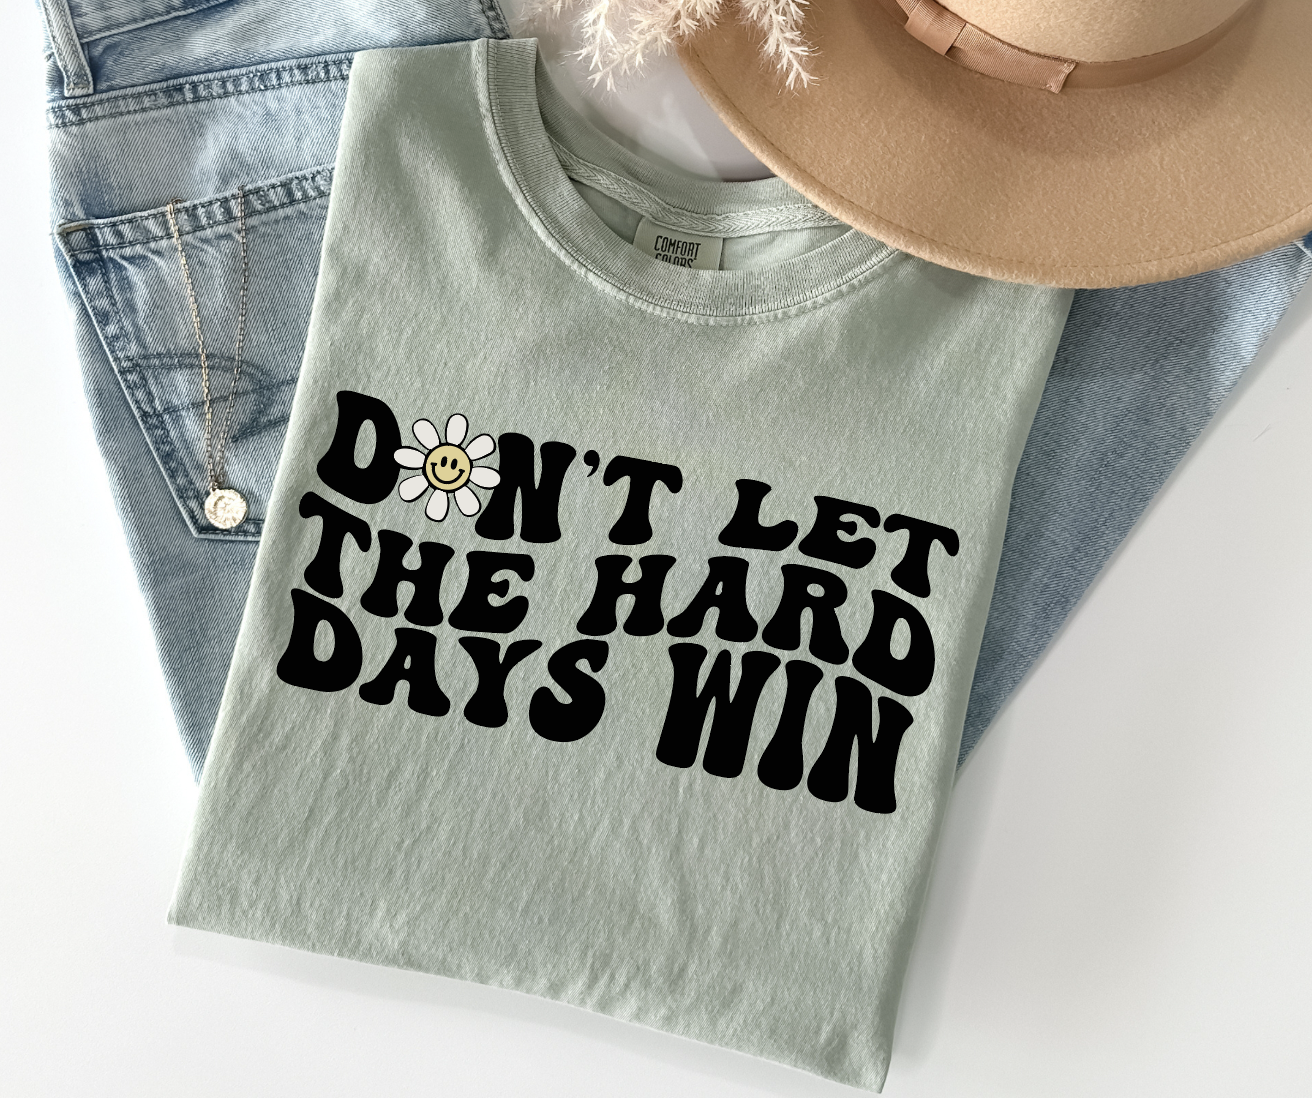 Don't Let the Hard Days Win